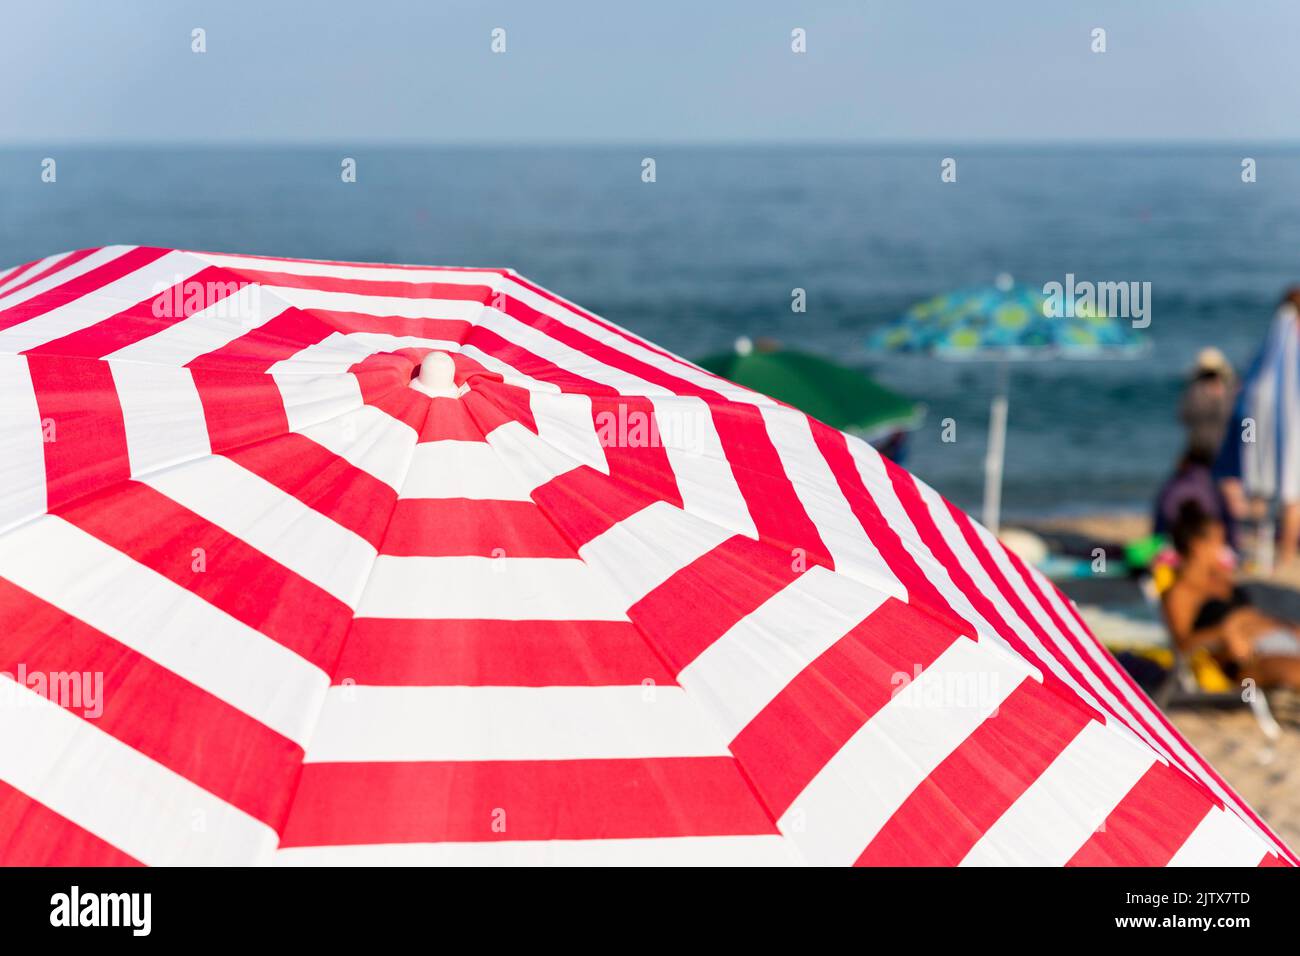 Striped beach umbrella at the beach with tourists and sea in background. Stock Photo